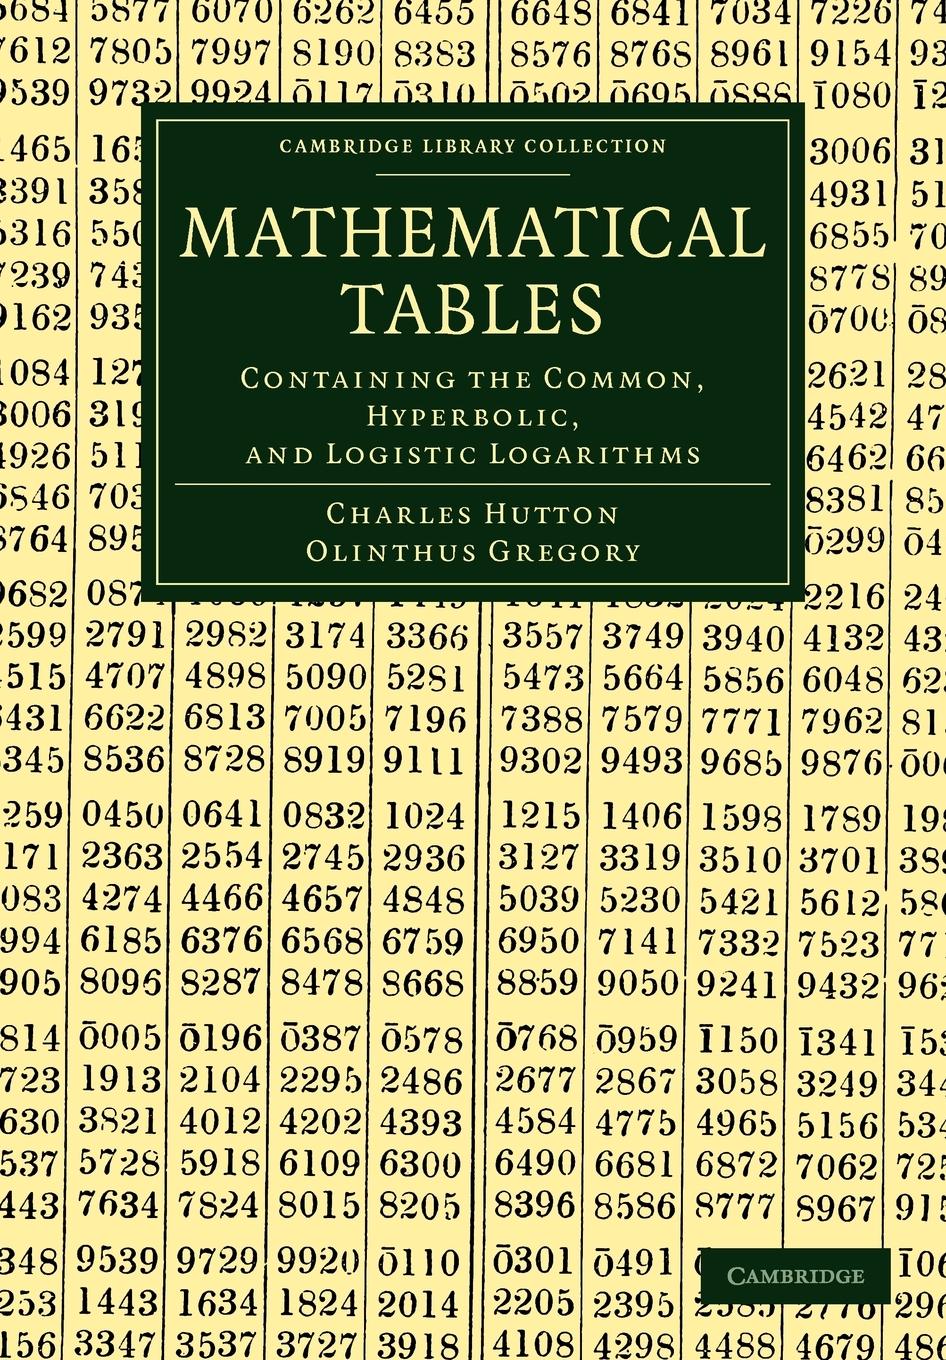 Mathematical Tables - Hutton, Charles Gregory, Olinthus